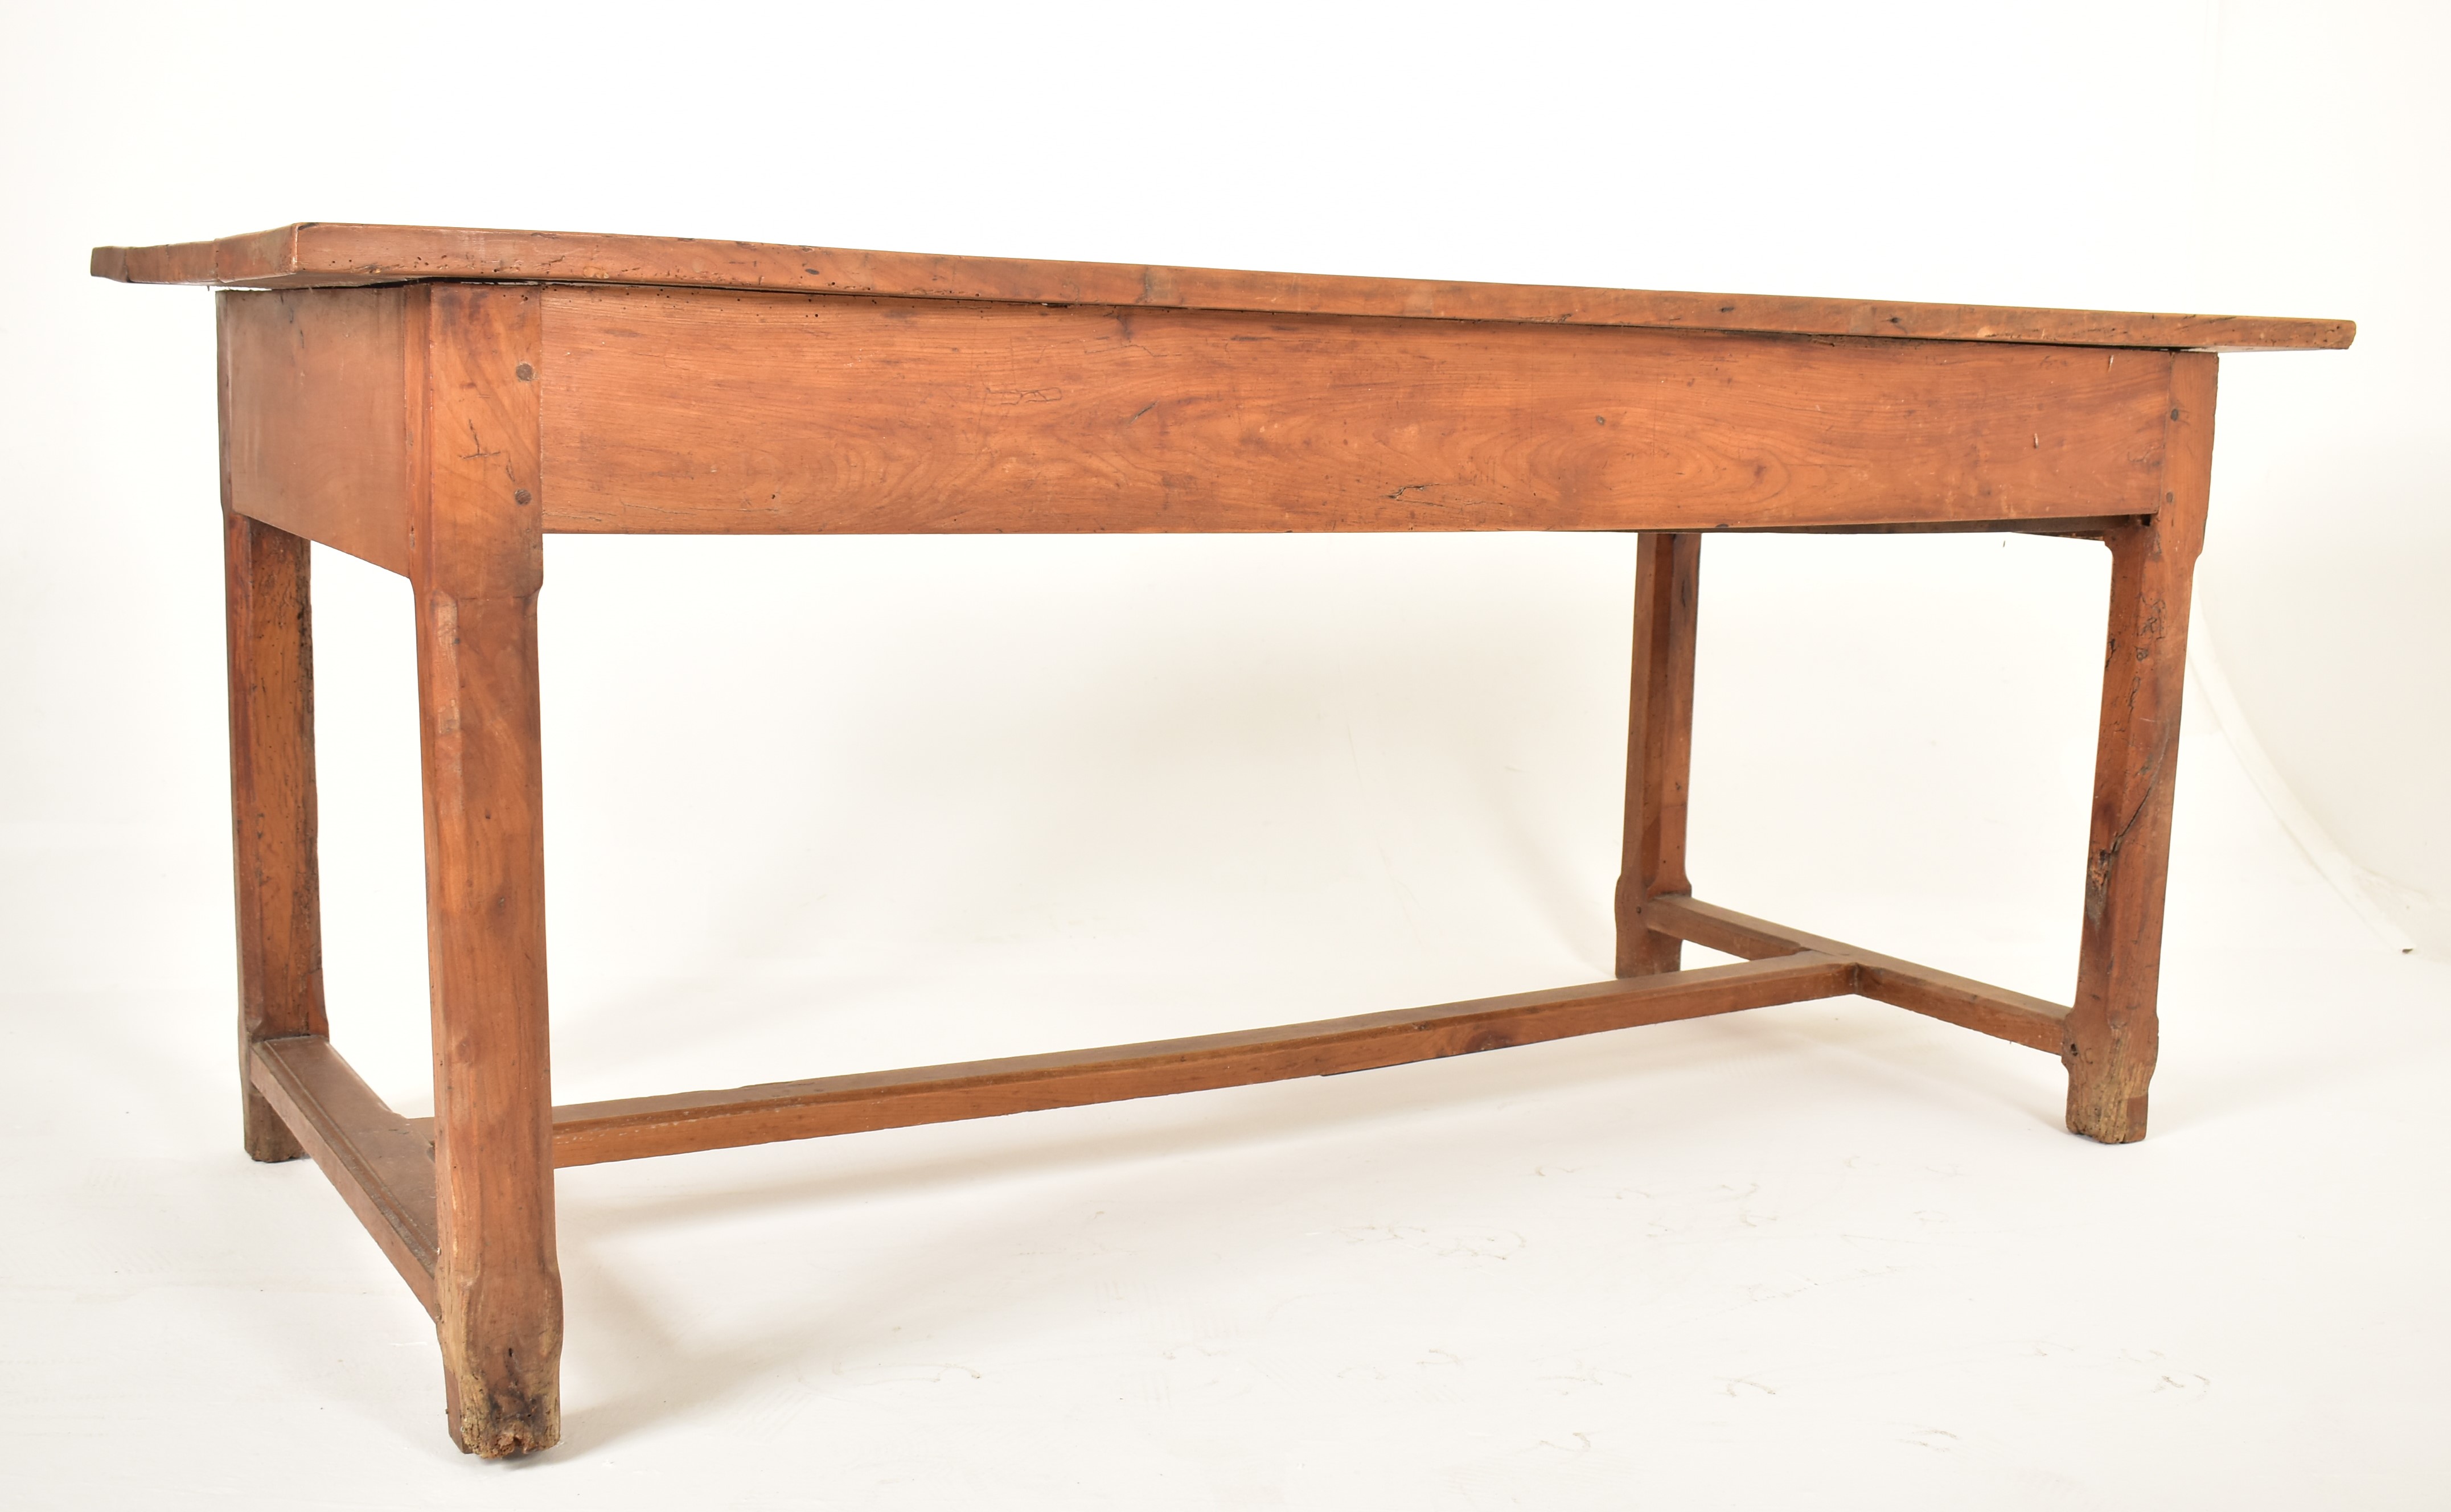 19TH CENTURY FRENCH CHESTNUT WOOD REFECTORY DINING TABLE